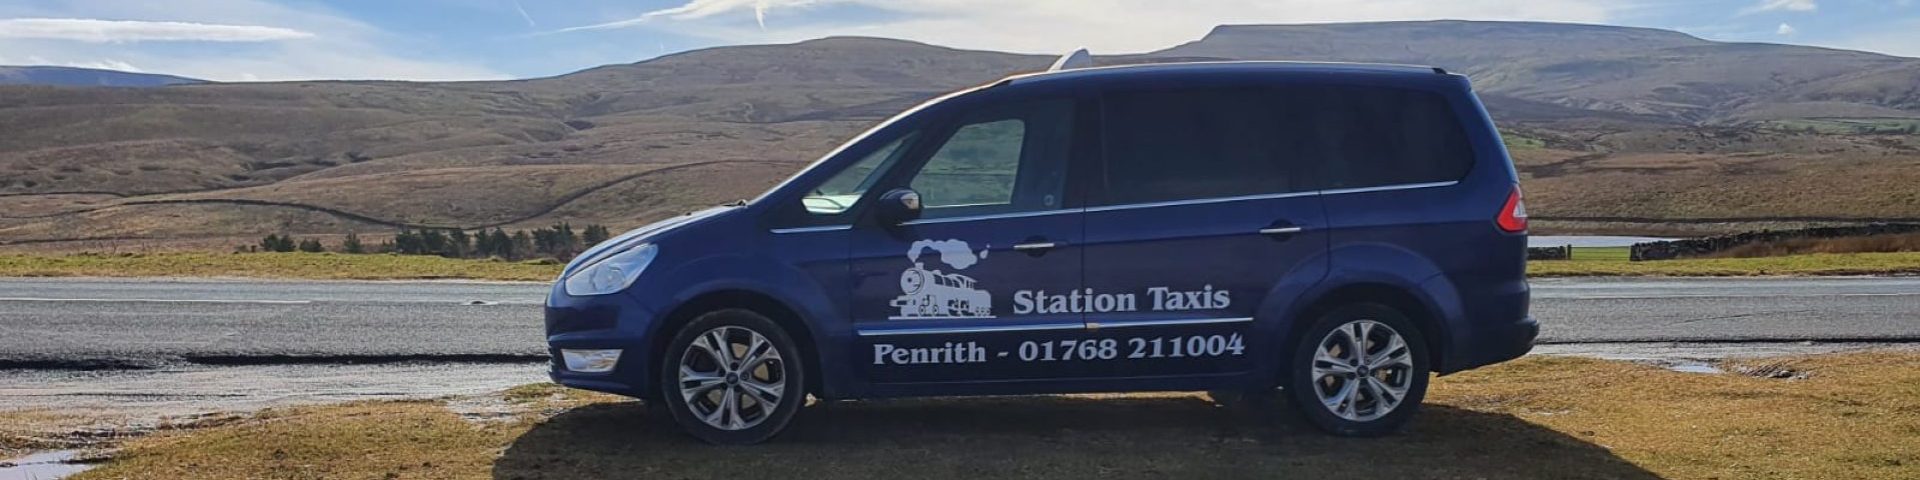 Able  Station Taxis Penrith Cumbria 01768211004